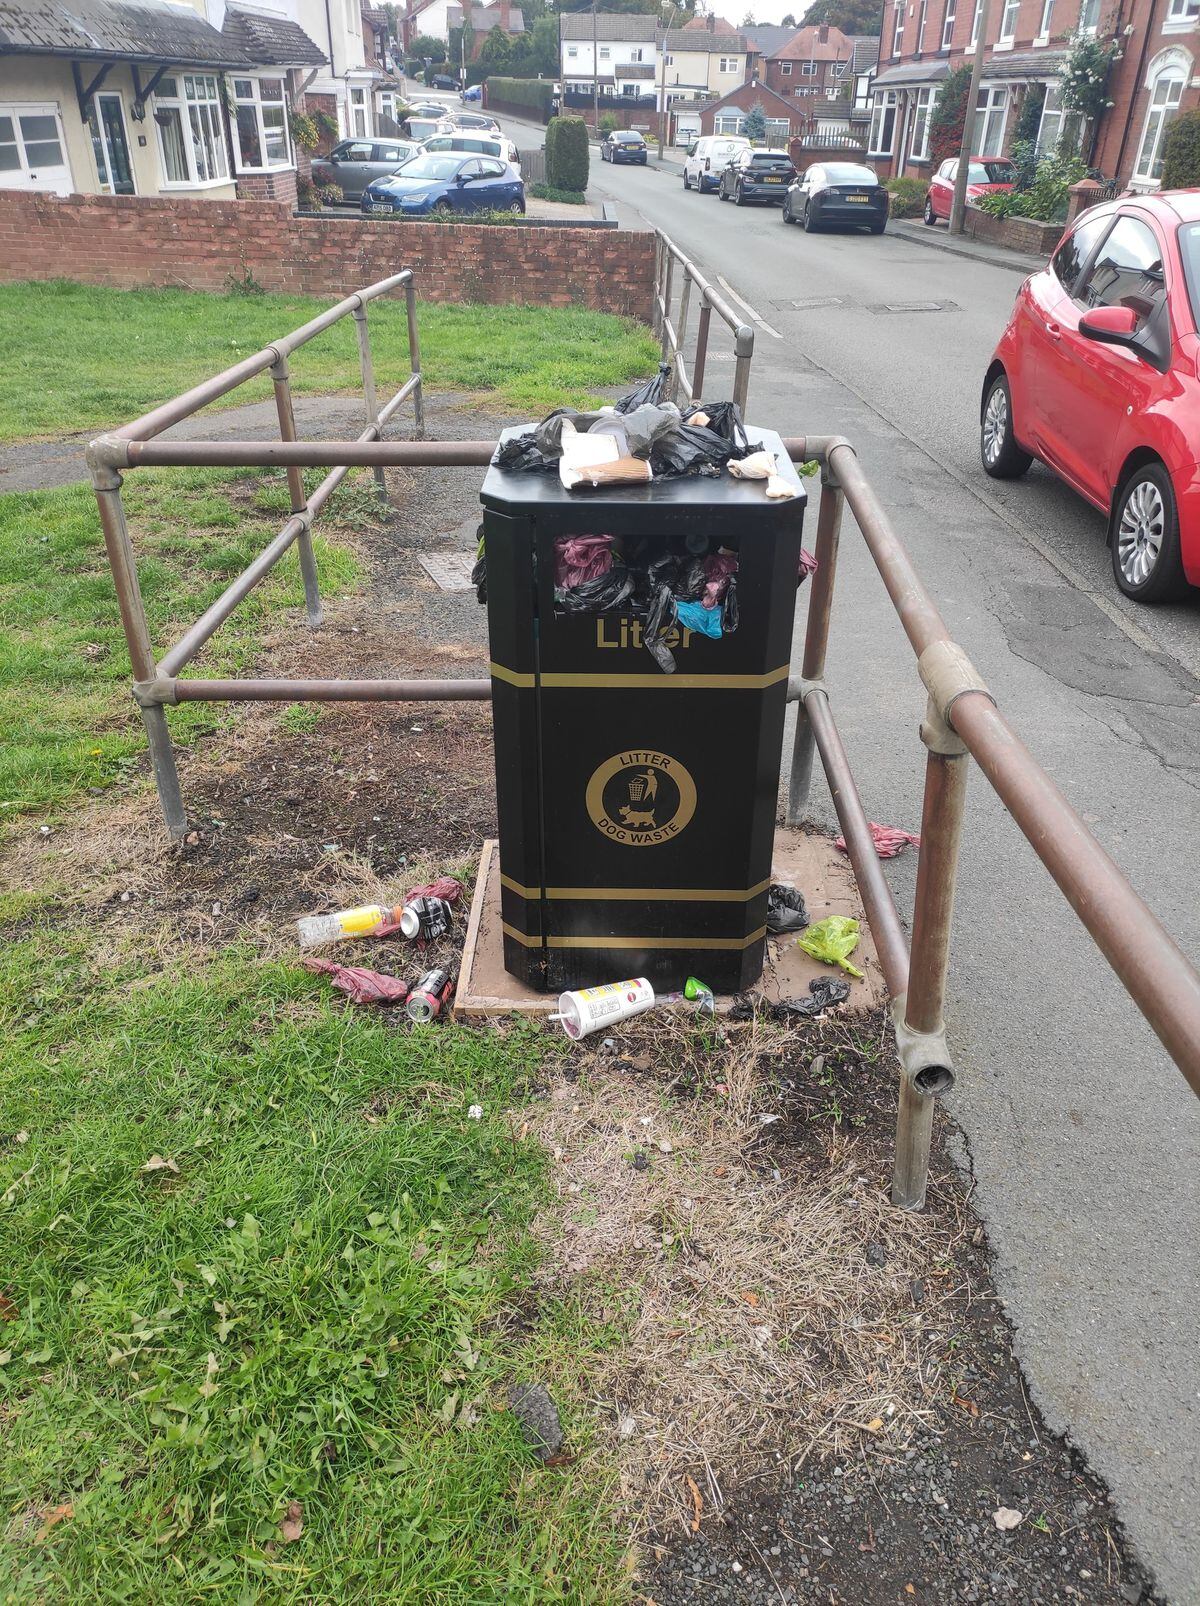 One of the overflowing dog poo bins in Stourbridge. Photo: Cat Eccles